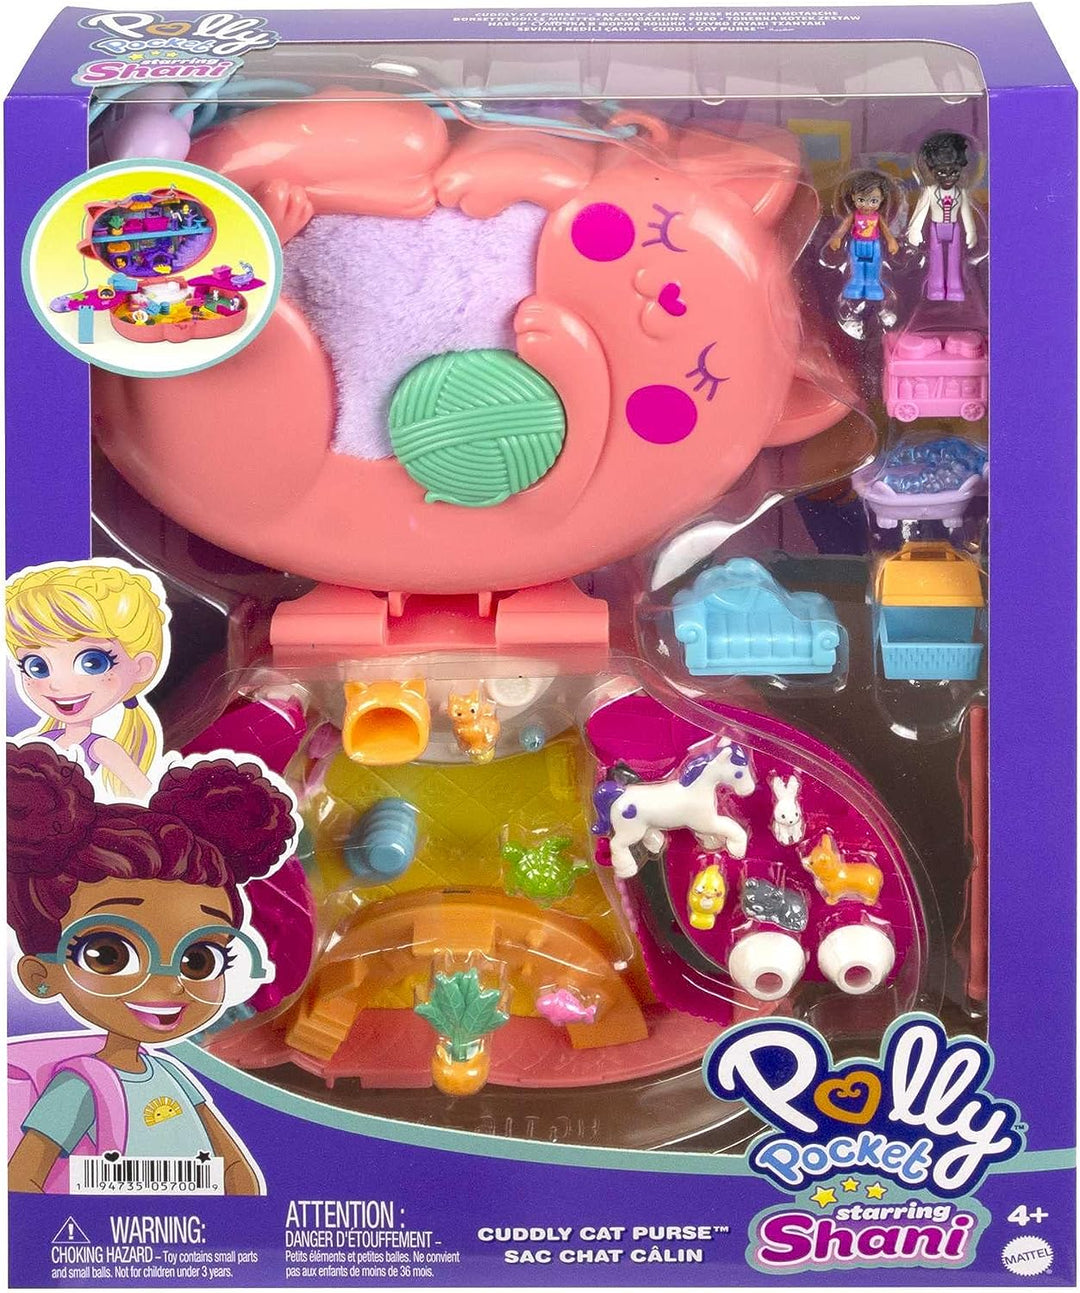 Polly Pocket Starring Shani Cuddly Cat Purse, Pet Vet Theme with 2 Micro Dolls